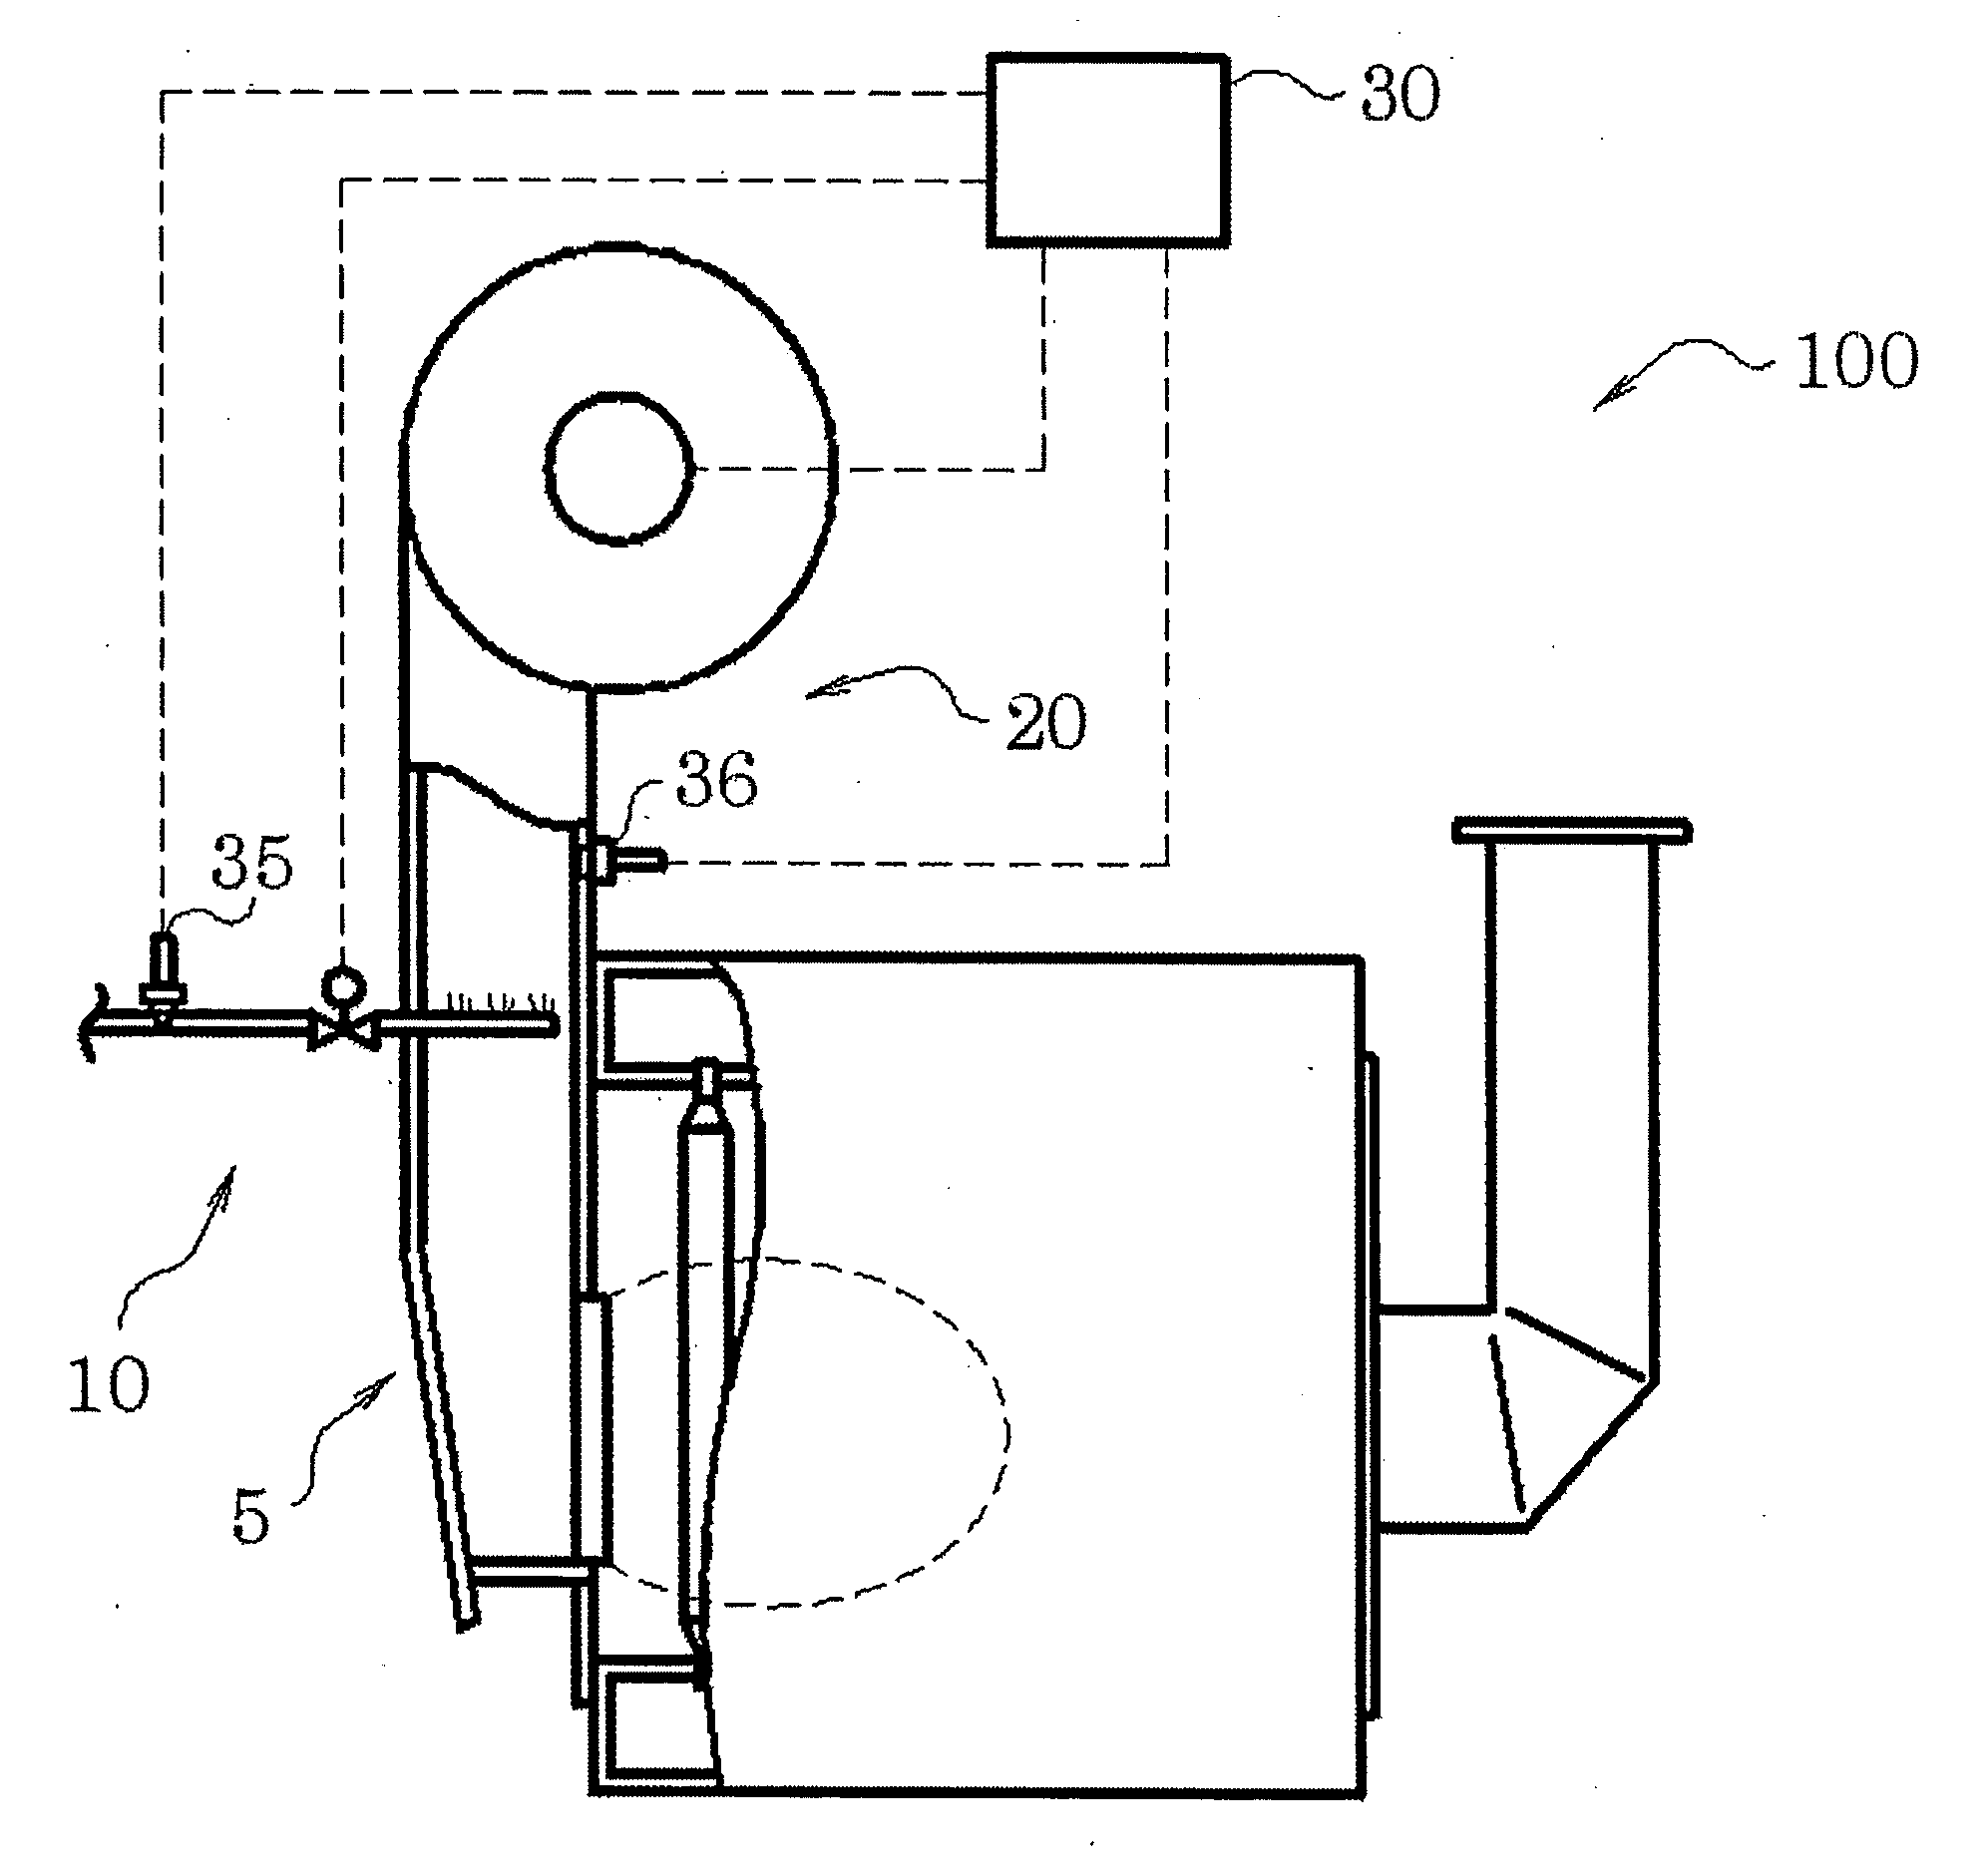 Boiler and combustion control method